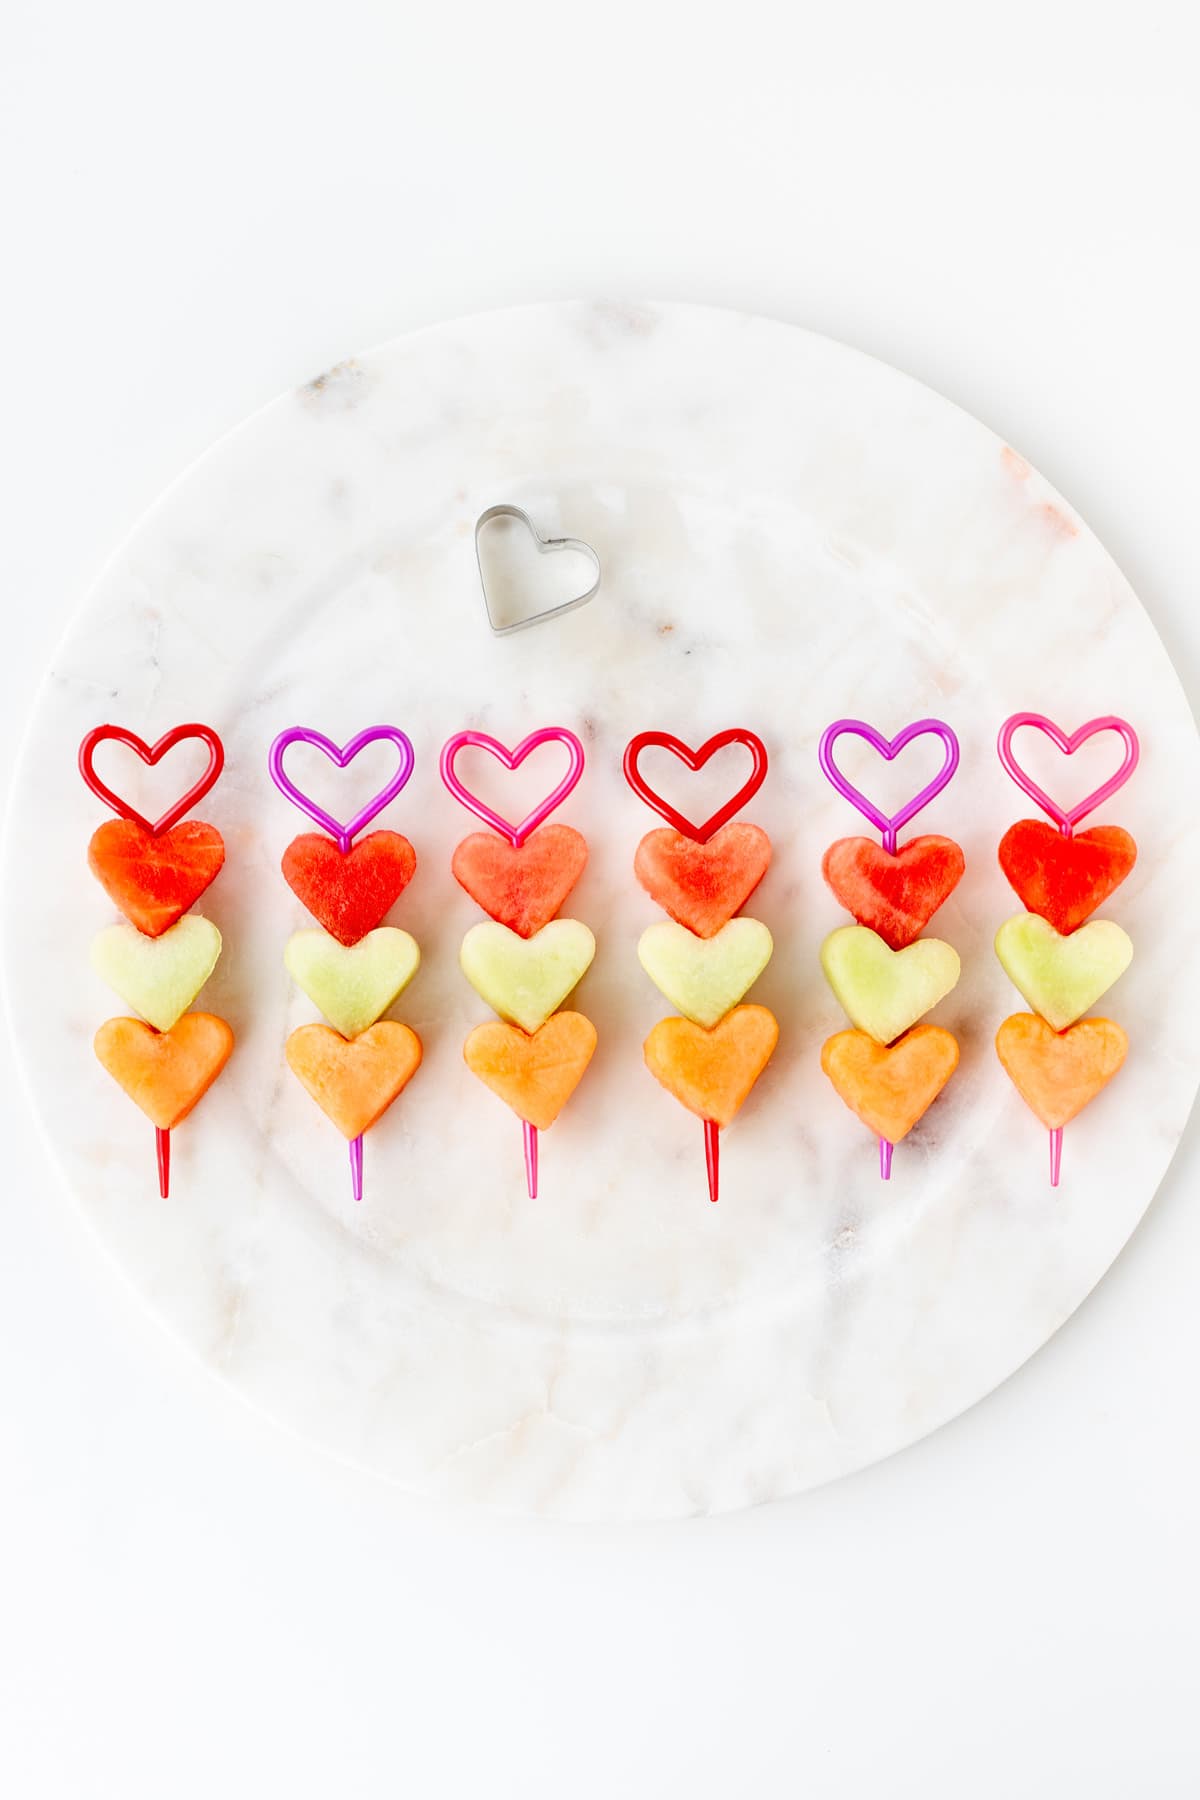 Valentine's Day fruit kabobs lined up on a decorative plate.